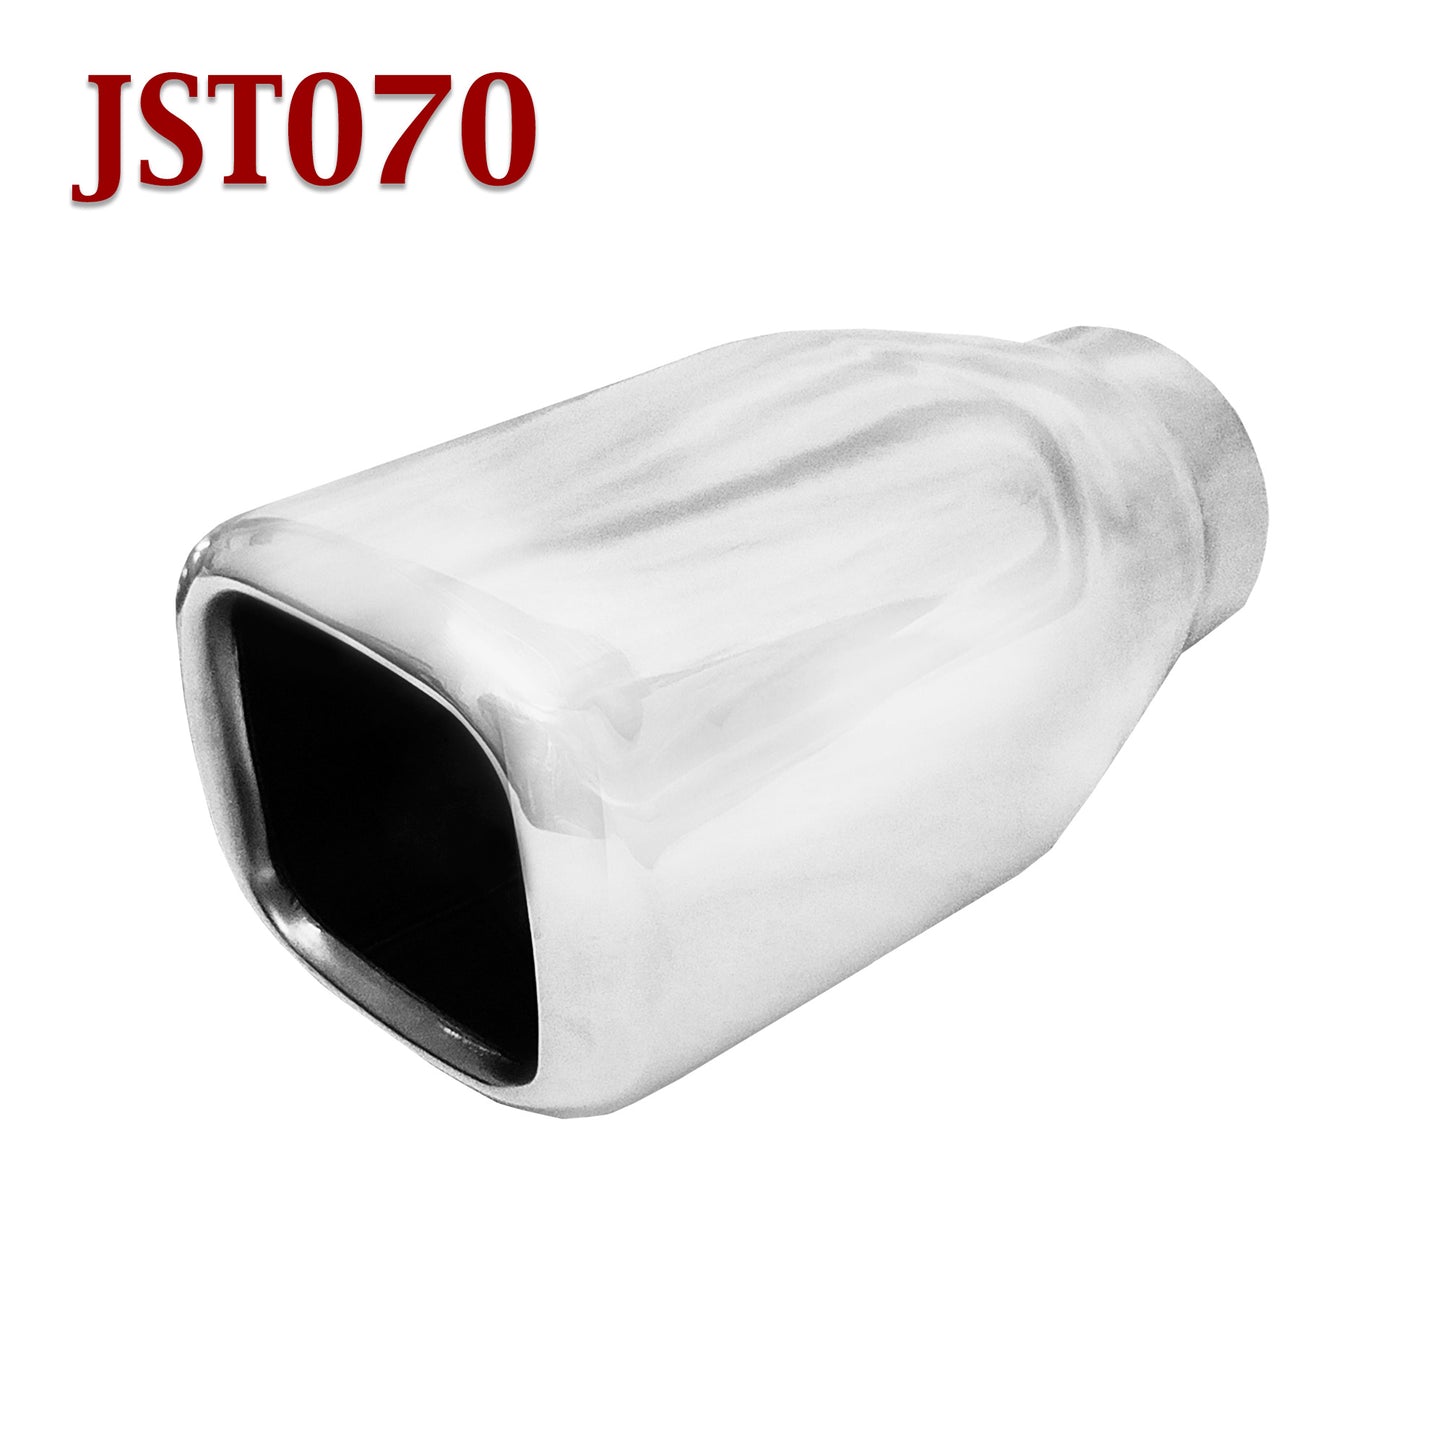 JST070 2.25" Stainless Square Exhaust Tip 2 1/4" Inlet / 4" Outlet / 7" Long